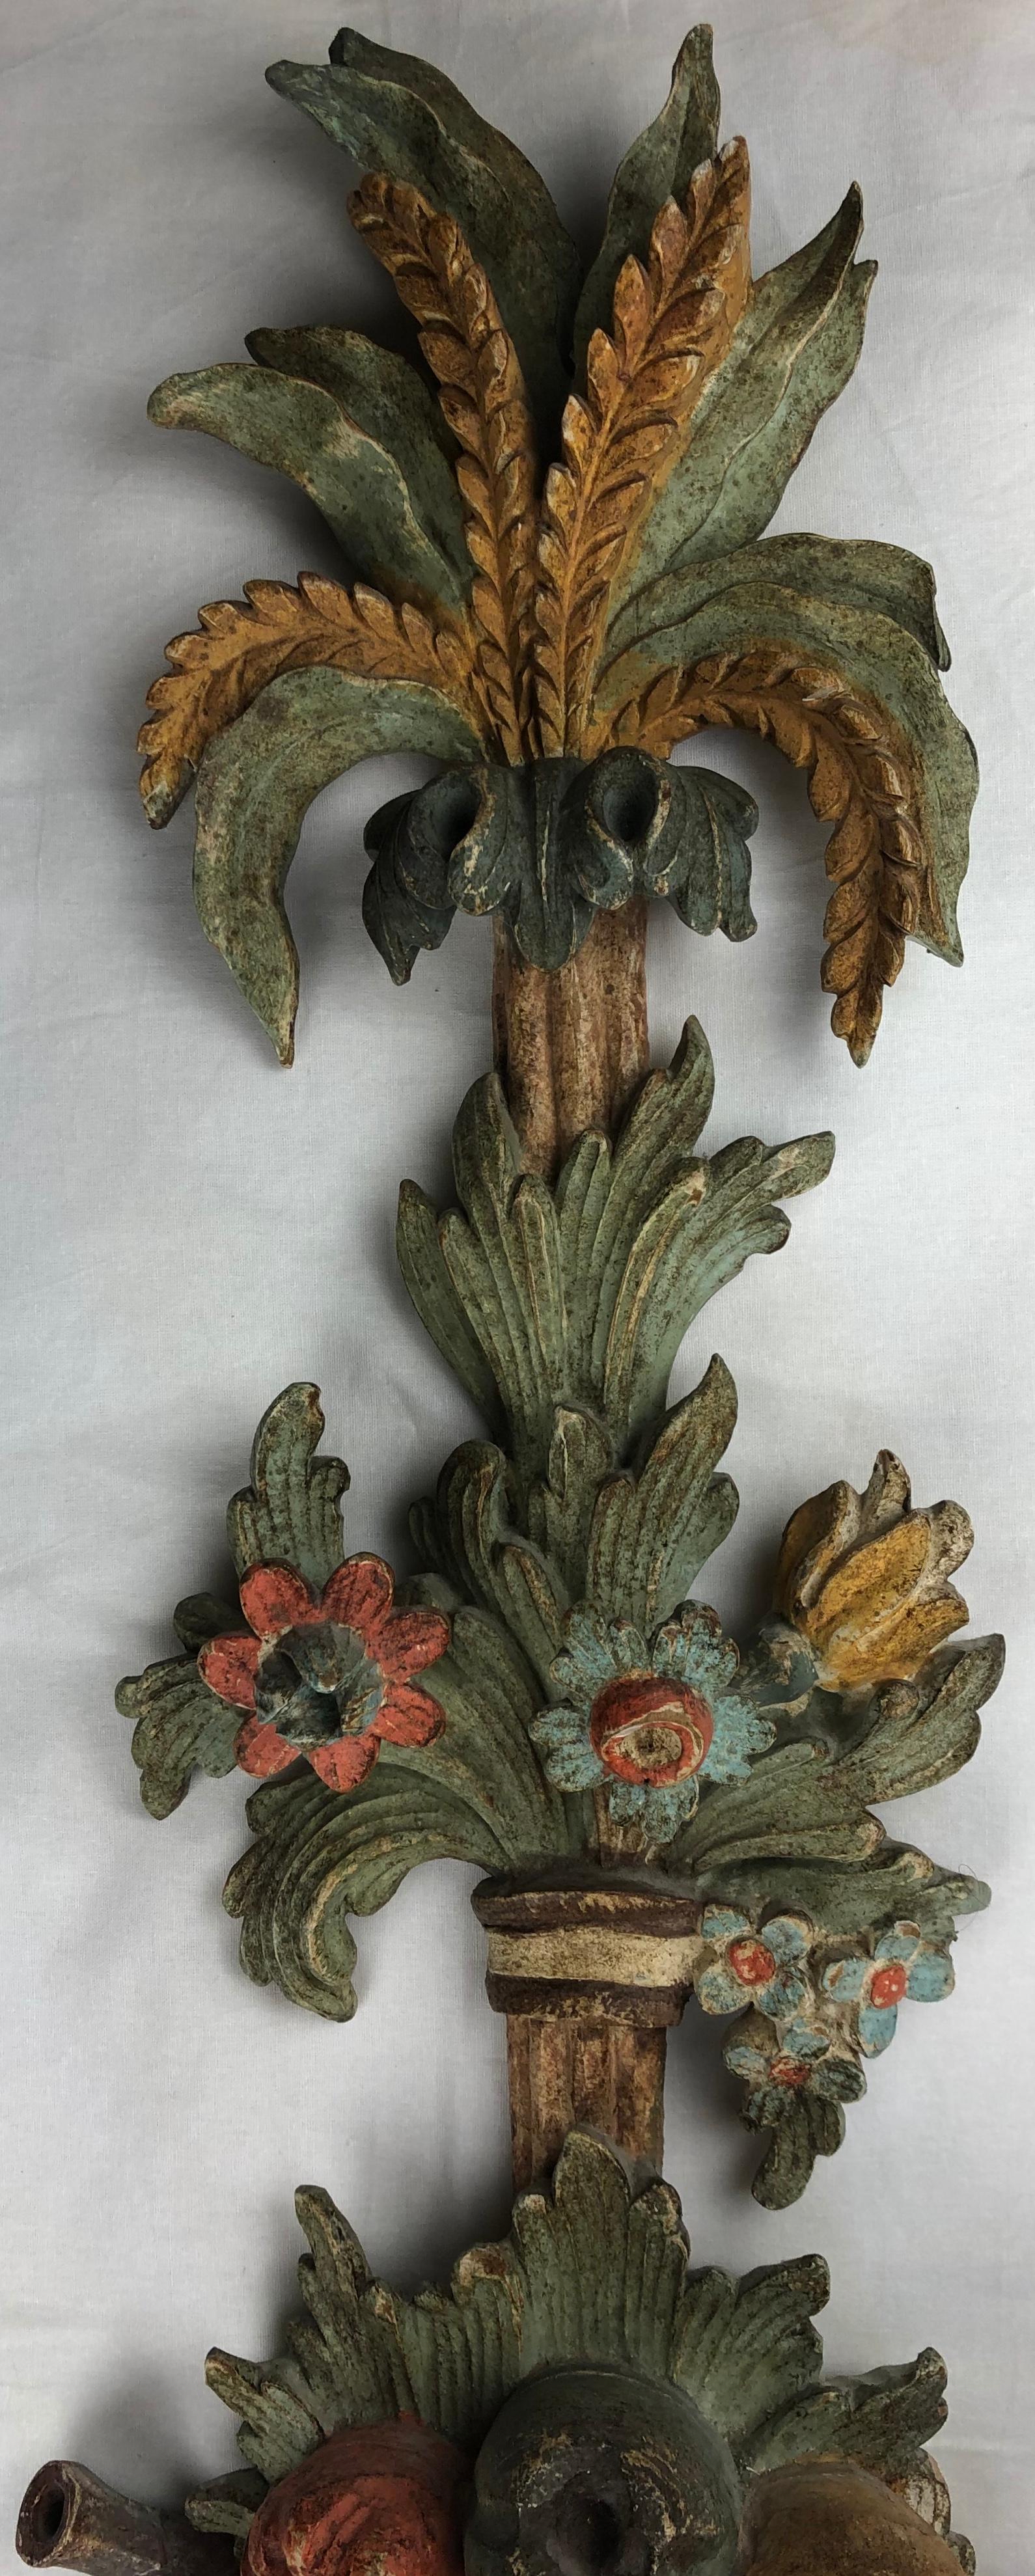 Beautiful sconce, with remarkable floral and foliage designs and details. The wooden sconce is hand carved and probably dates from the 1930s-1940s.

Recently rewired and in perfect working condition. 

Measures: 39 3/4